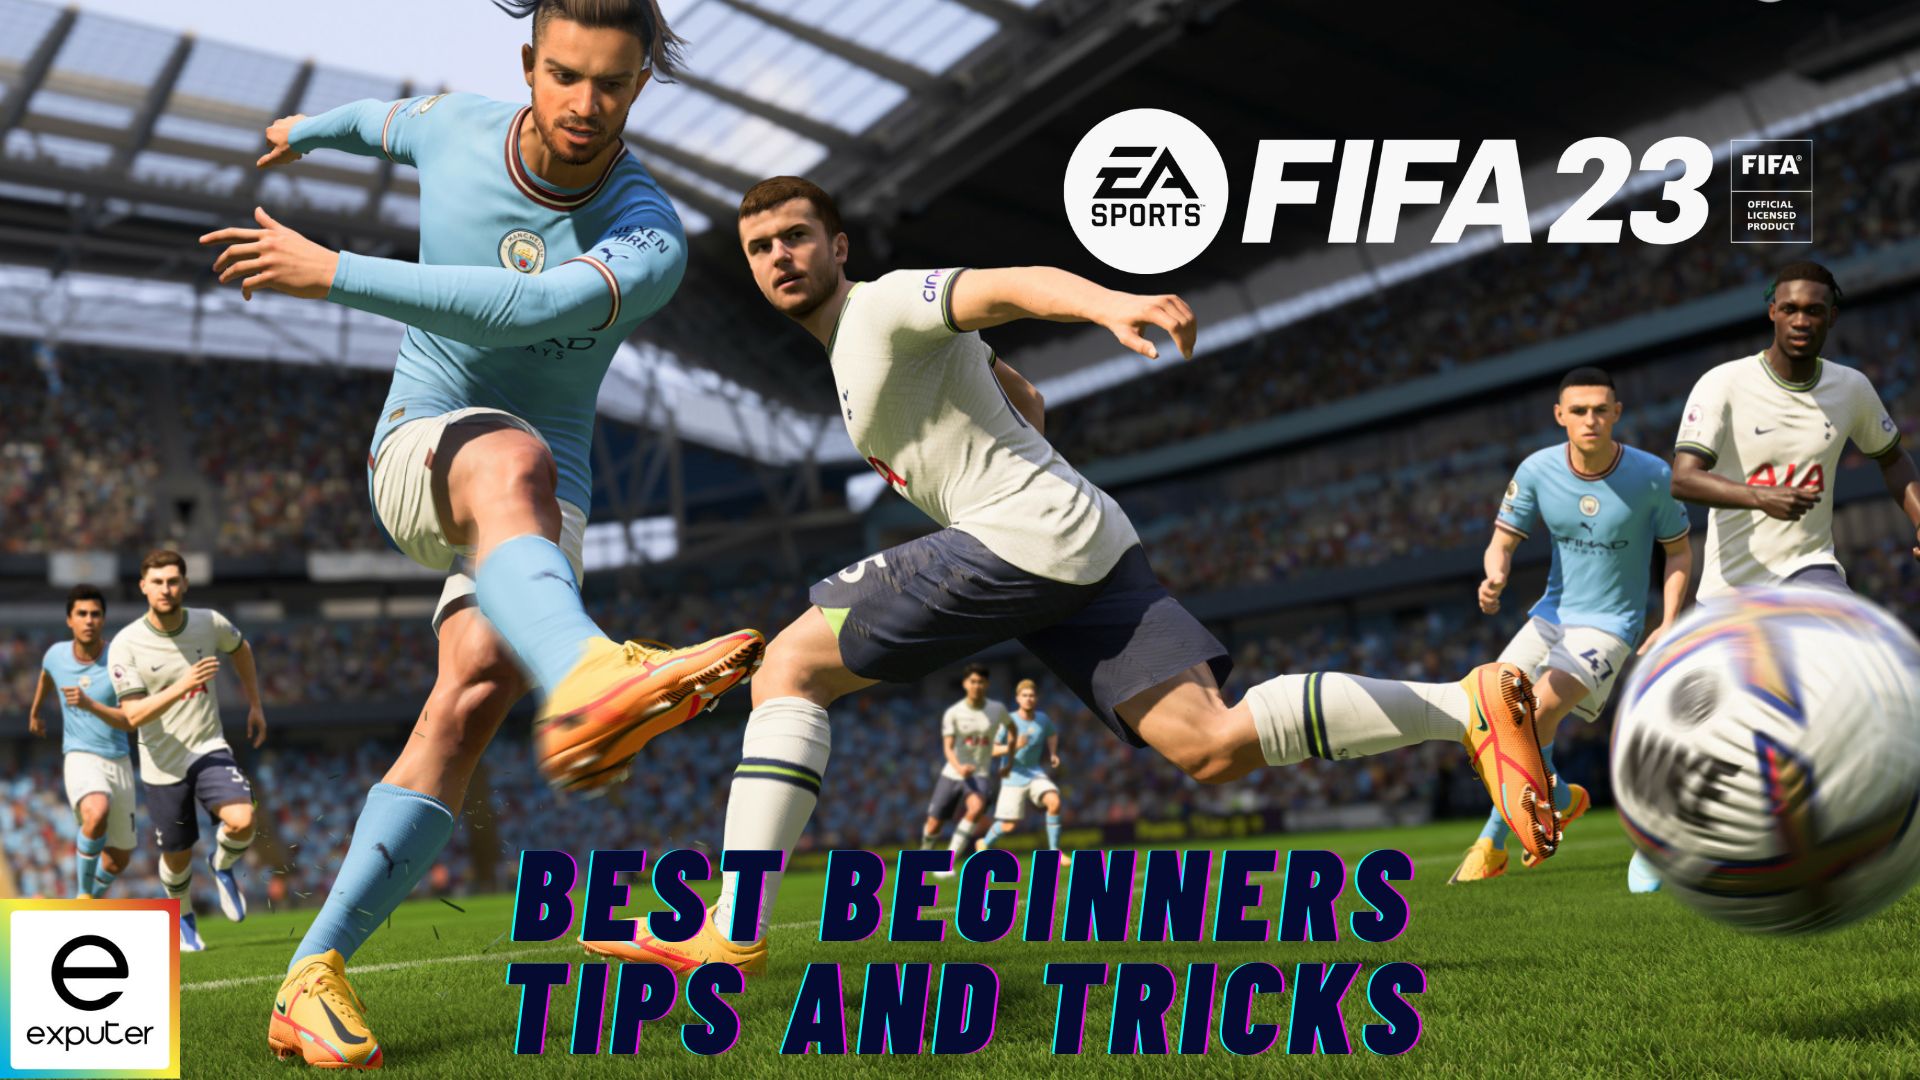 Beginners Tips for FIFA 23